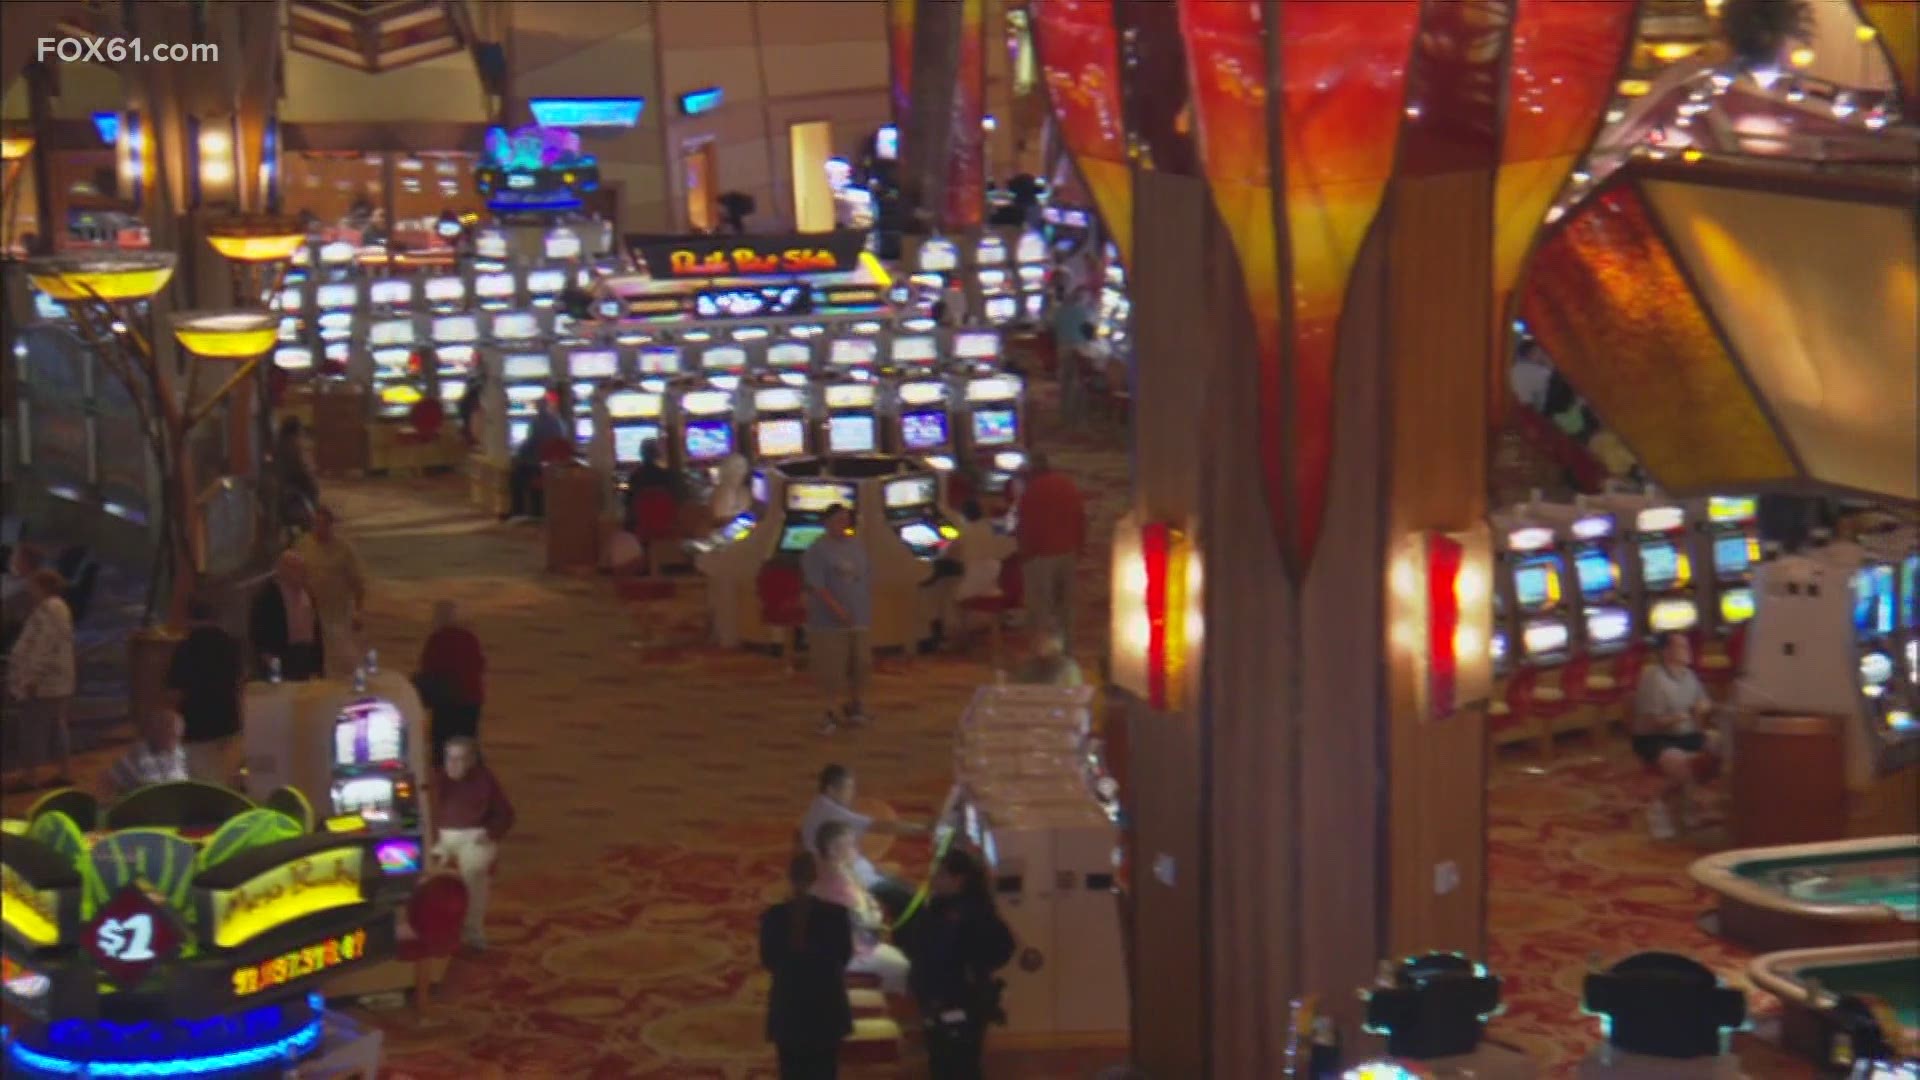 Mohegan Sun says it saw over 20,000 new people return to the casino in April. Those numbers helped contribute to their busiest month since the shutdown.